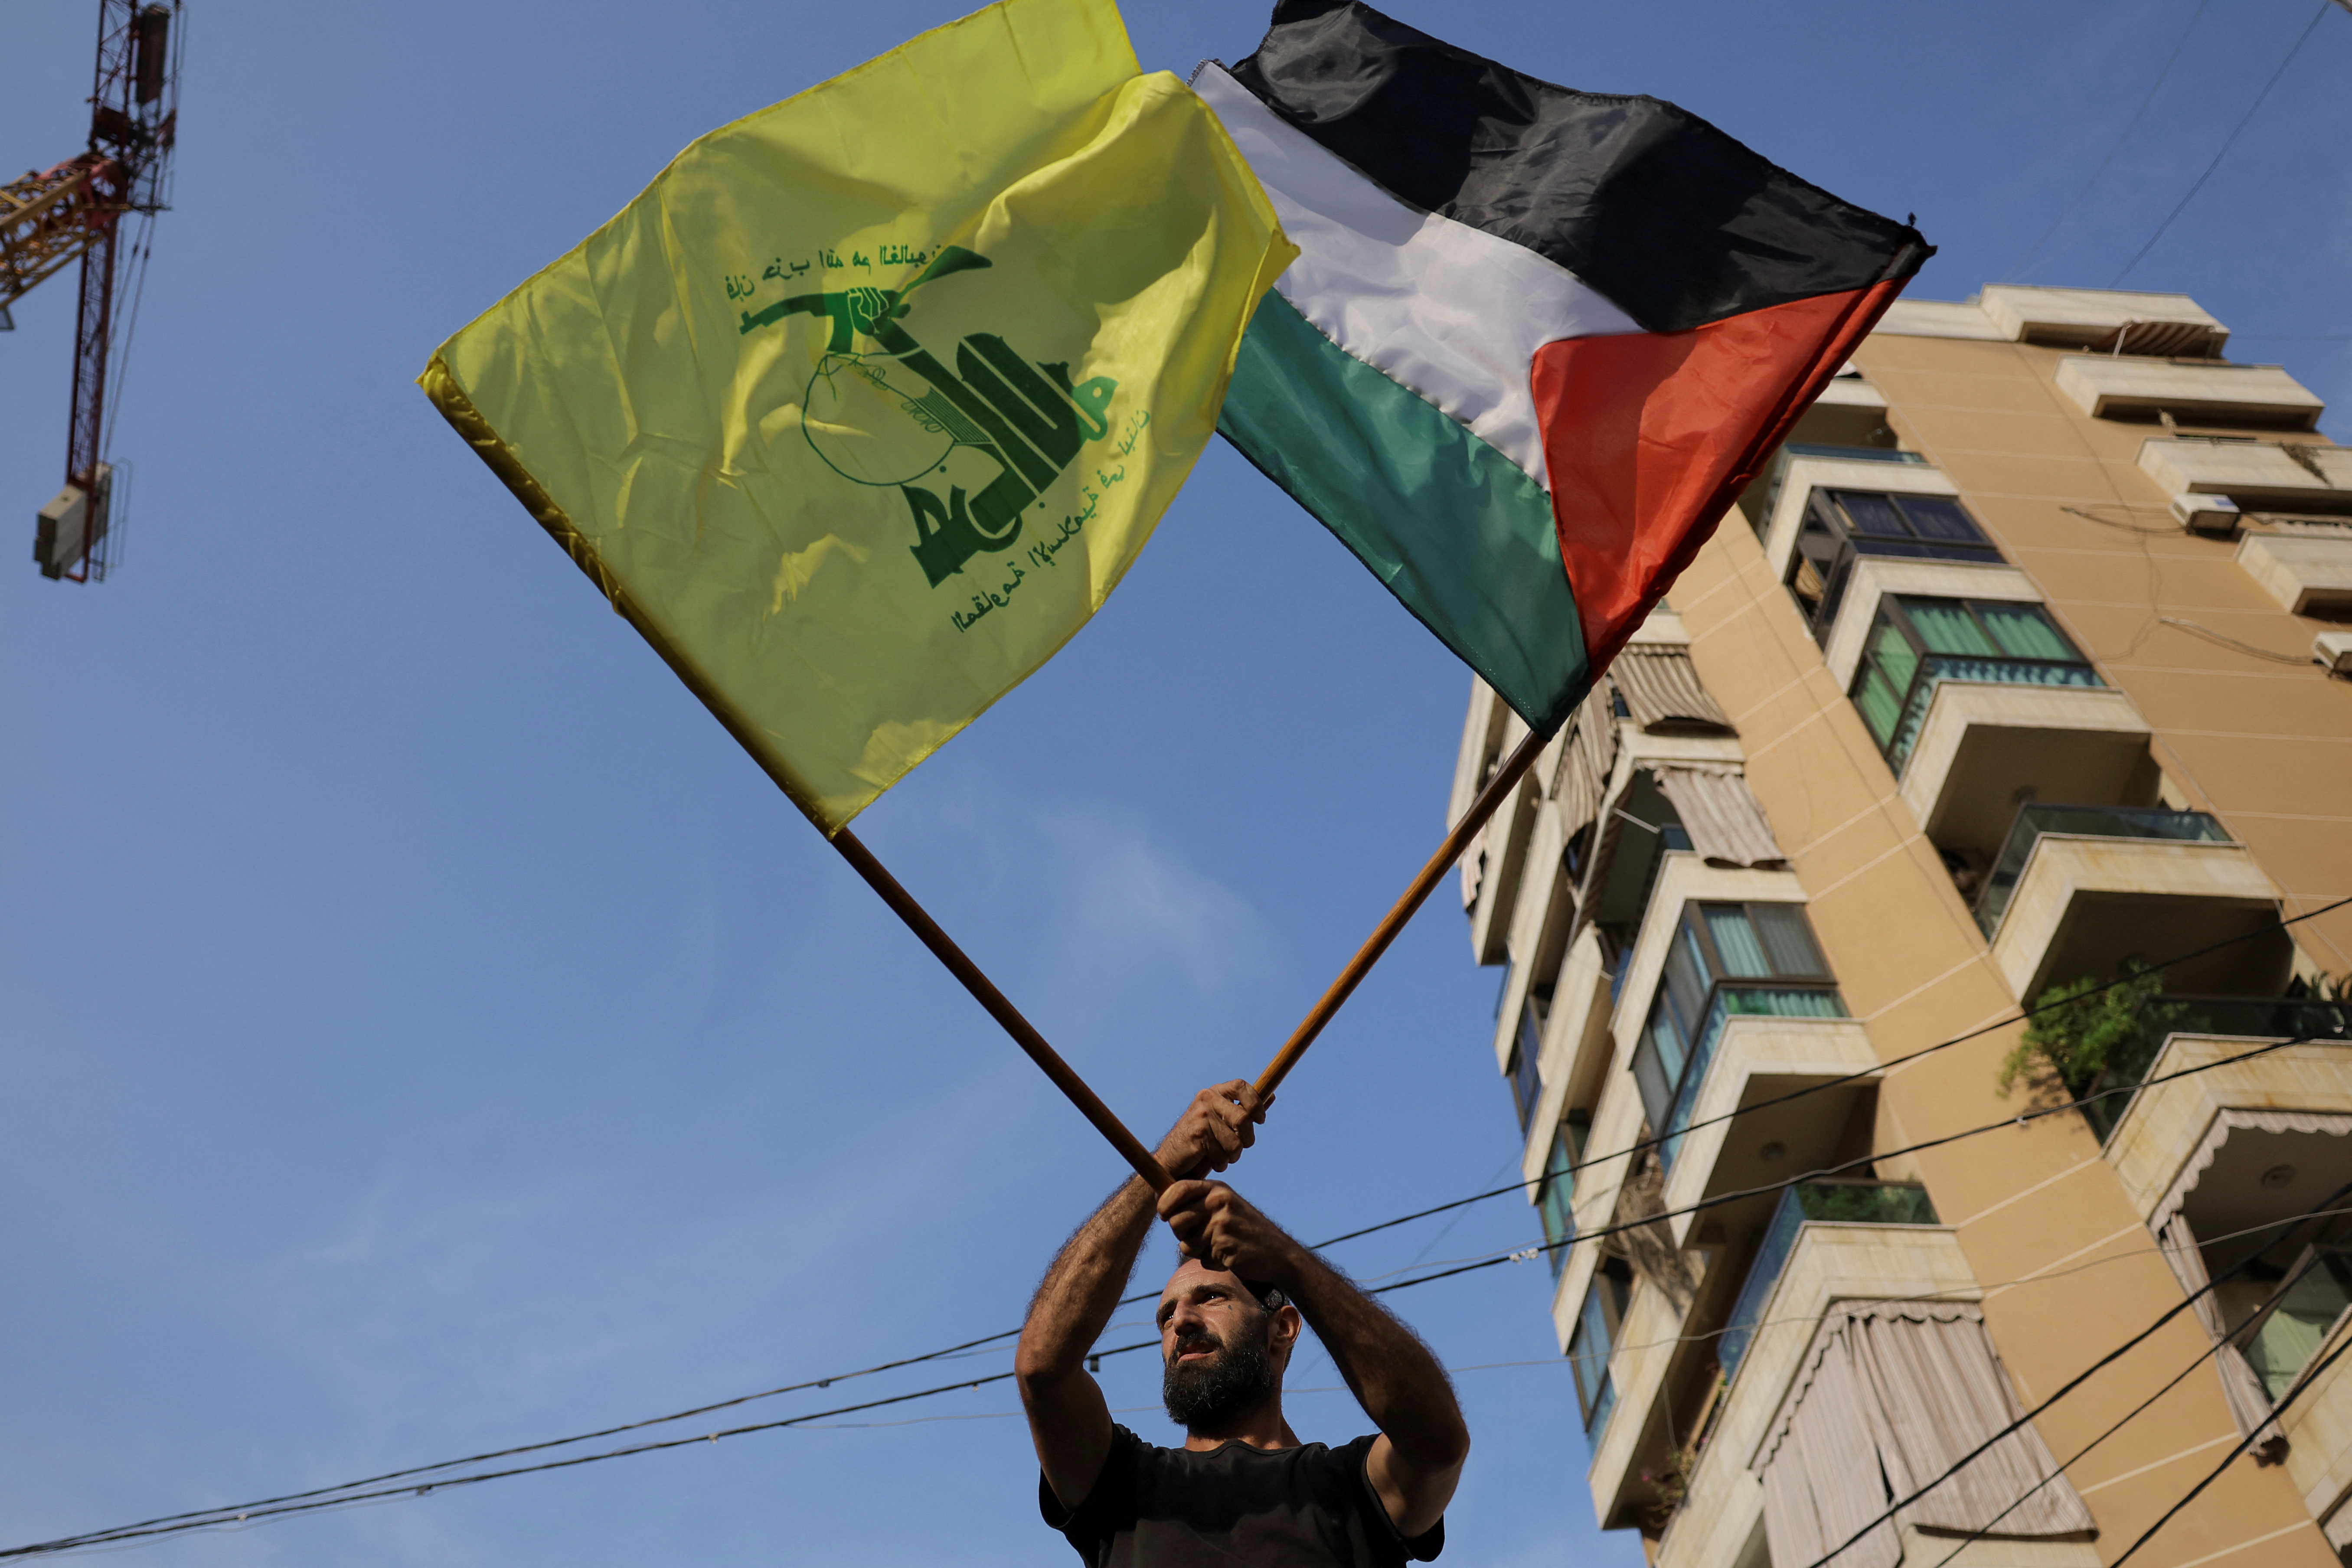 Lebanon's Hezbollah supporters protest in solidarity with Palestinians in Gaza, in Beirut